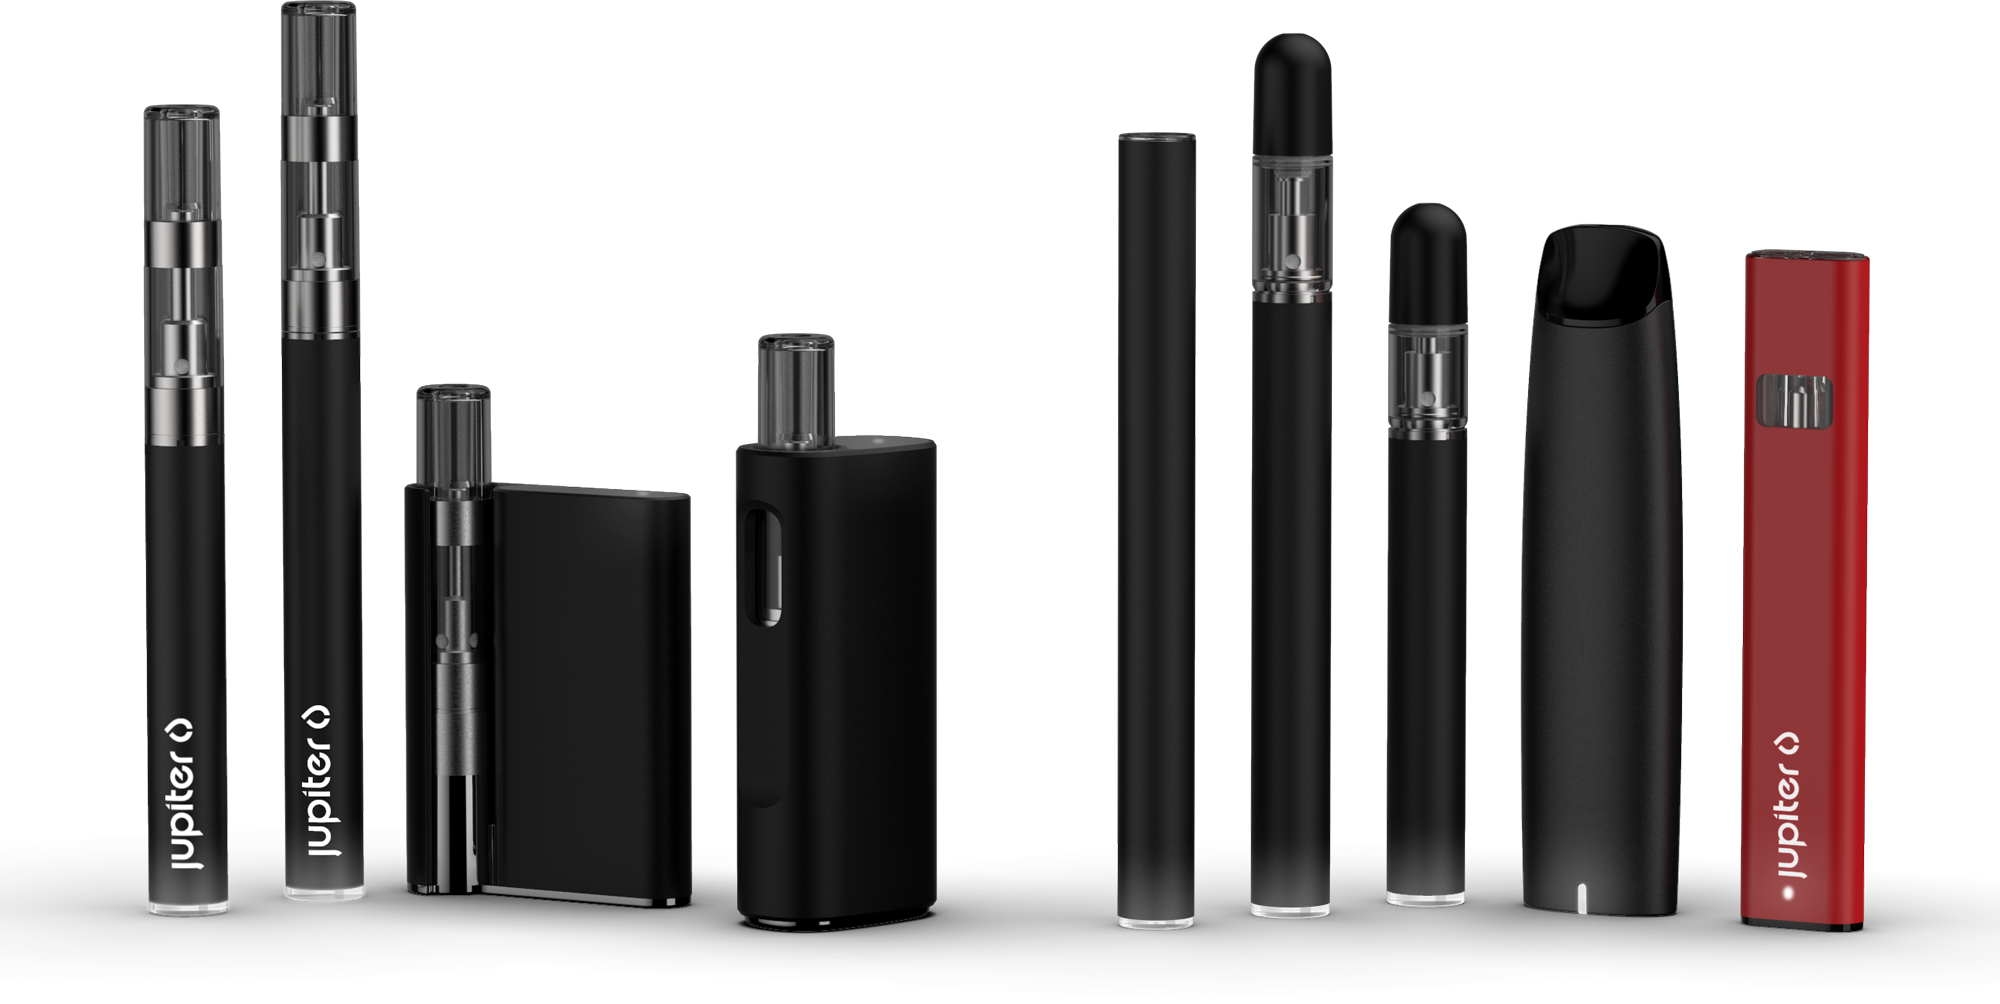 Jupiter Research Launches New Cannabis Vape Features, Packaging